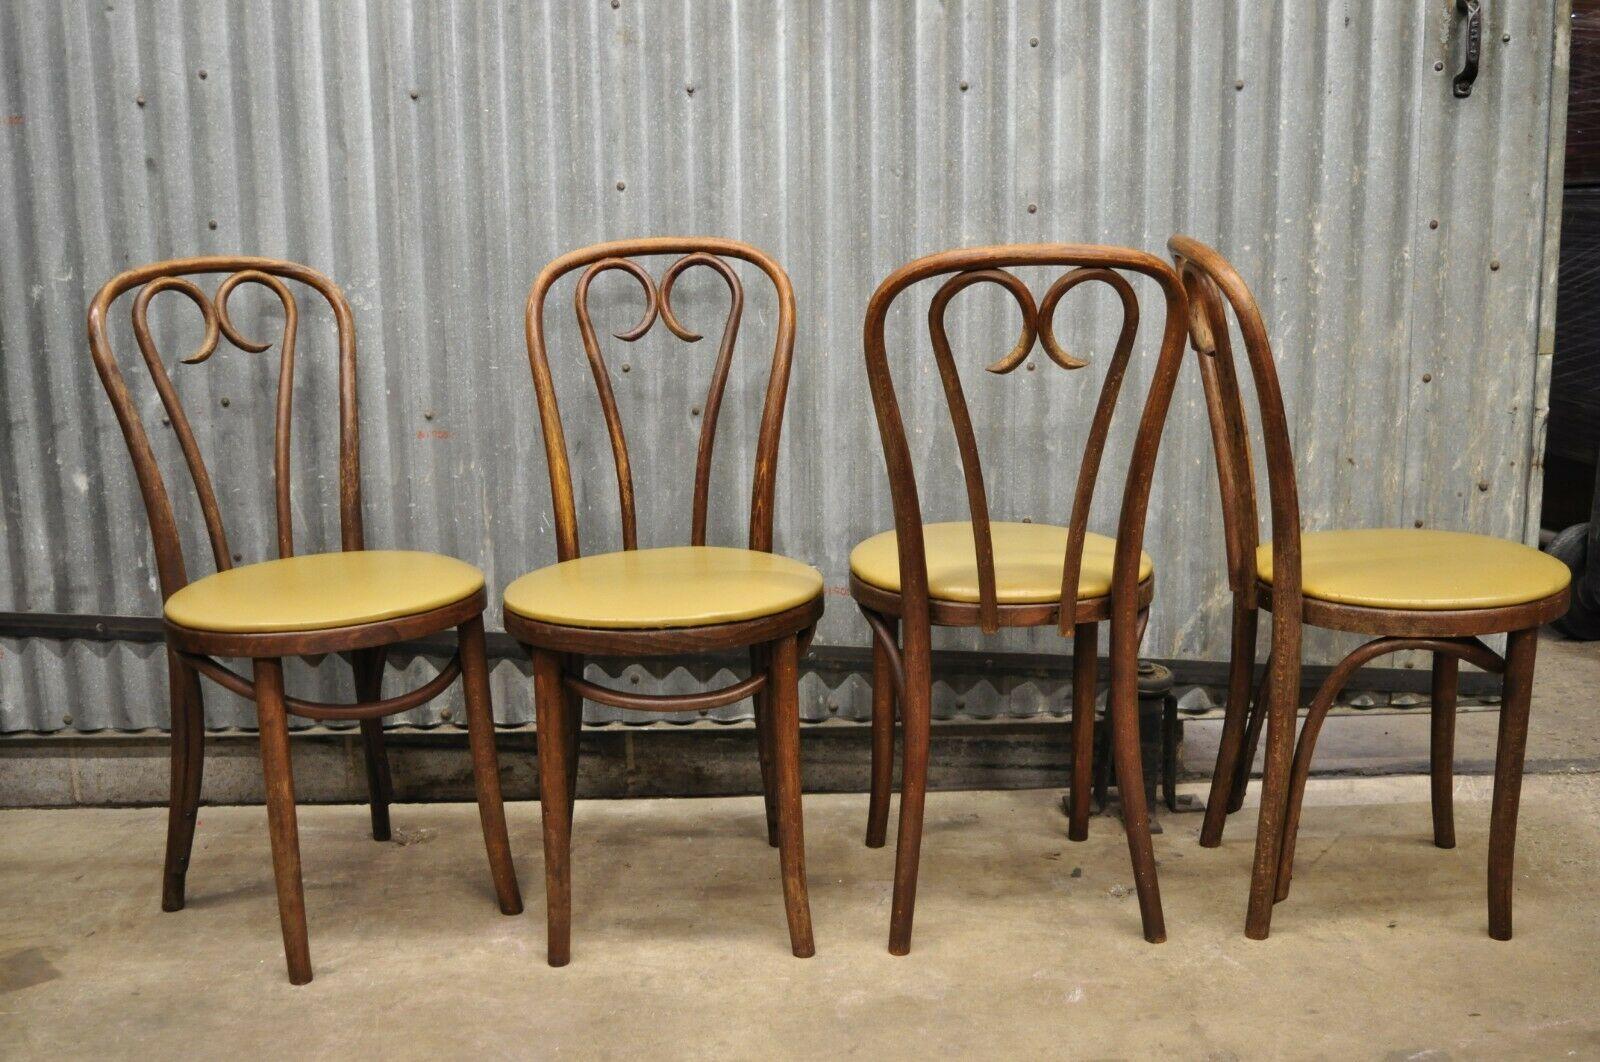 ZPM Radomsko Poland Bentwood Sweetheart Bistro Dining Chairs - Set of 4. Listing includes (4) side chairs, bentwood frames, round vinyl seats, original label, very nice vintage antique set. Circa Early 1900s. Measurements: 35